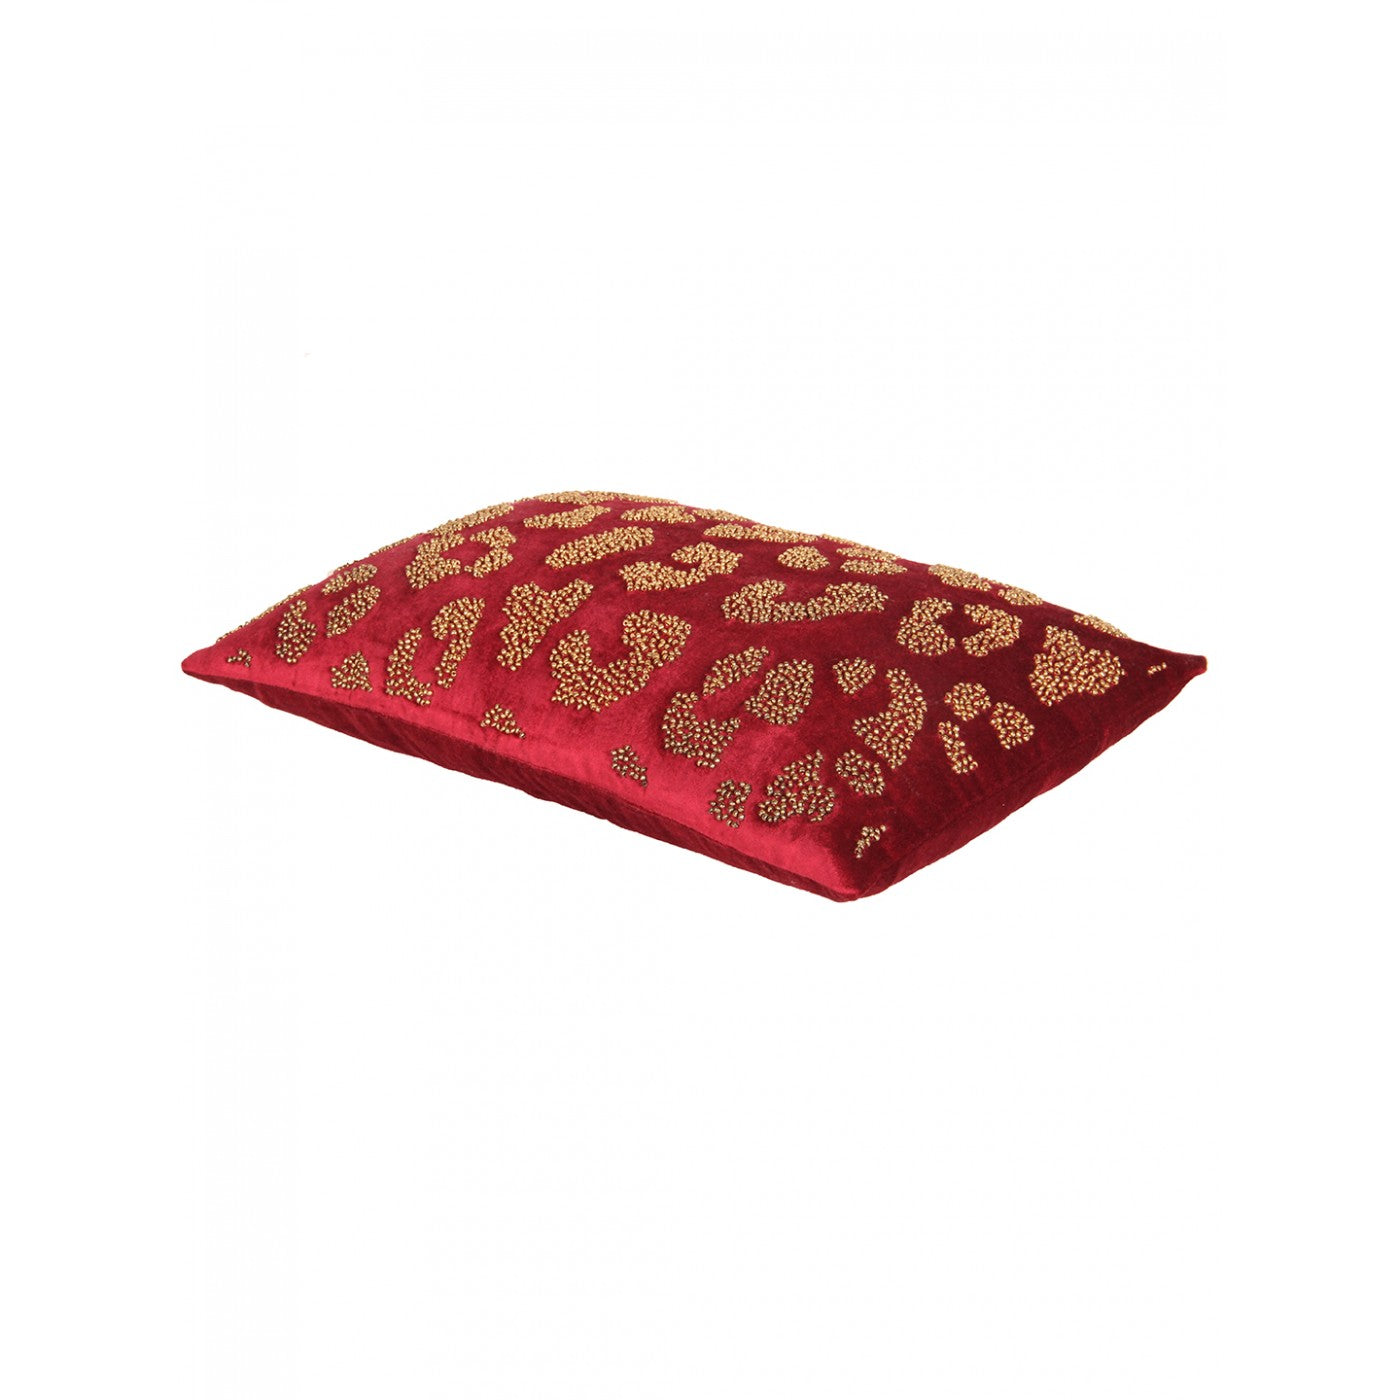 Red Enchantment 12x18 Inch Velvet Embroidered Cushion Cover